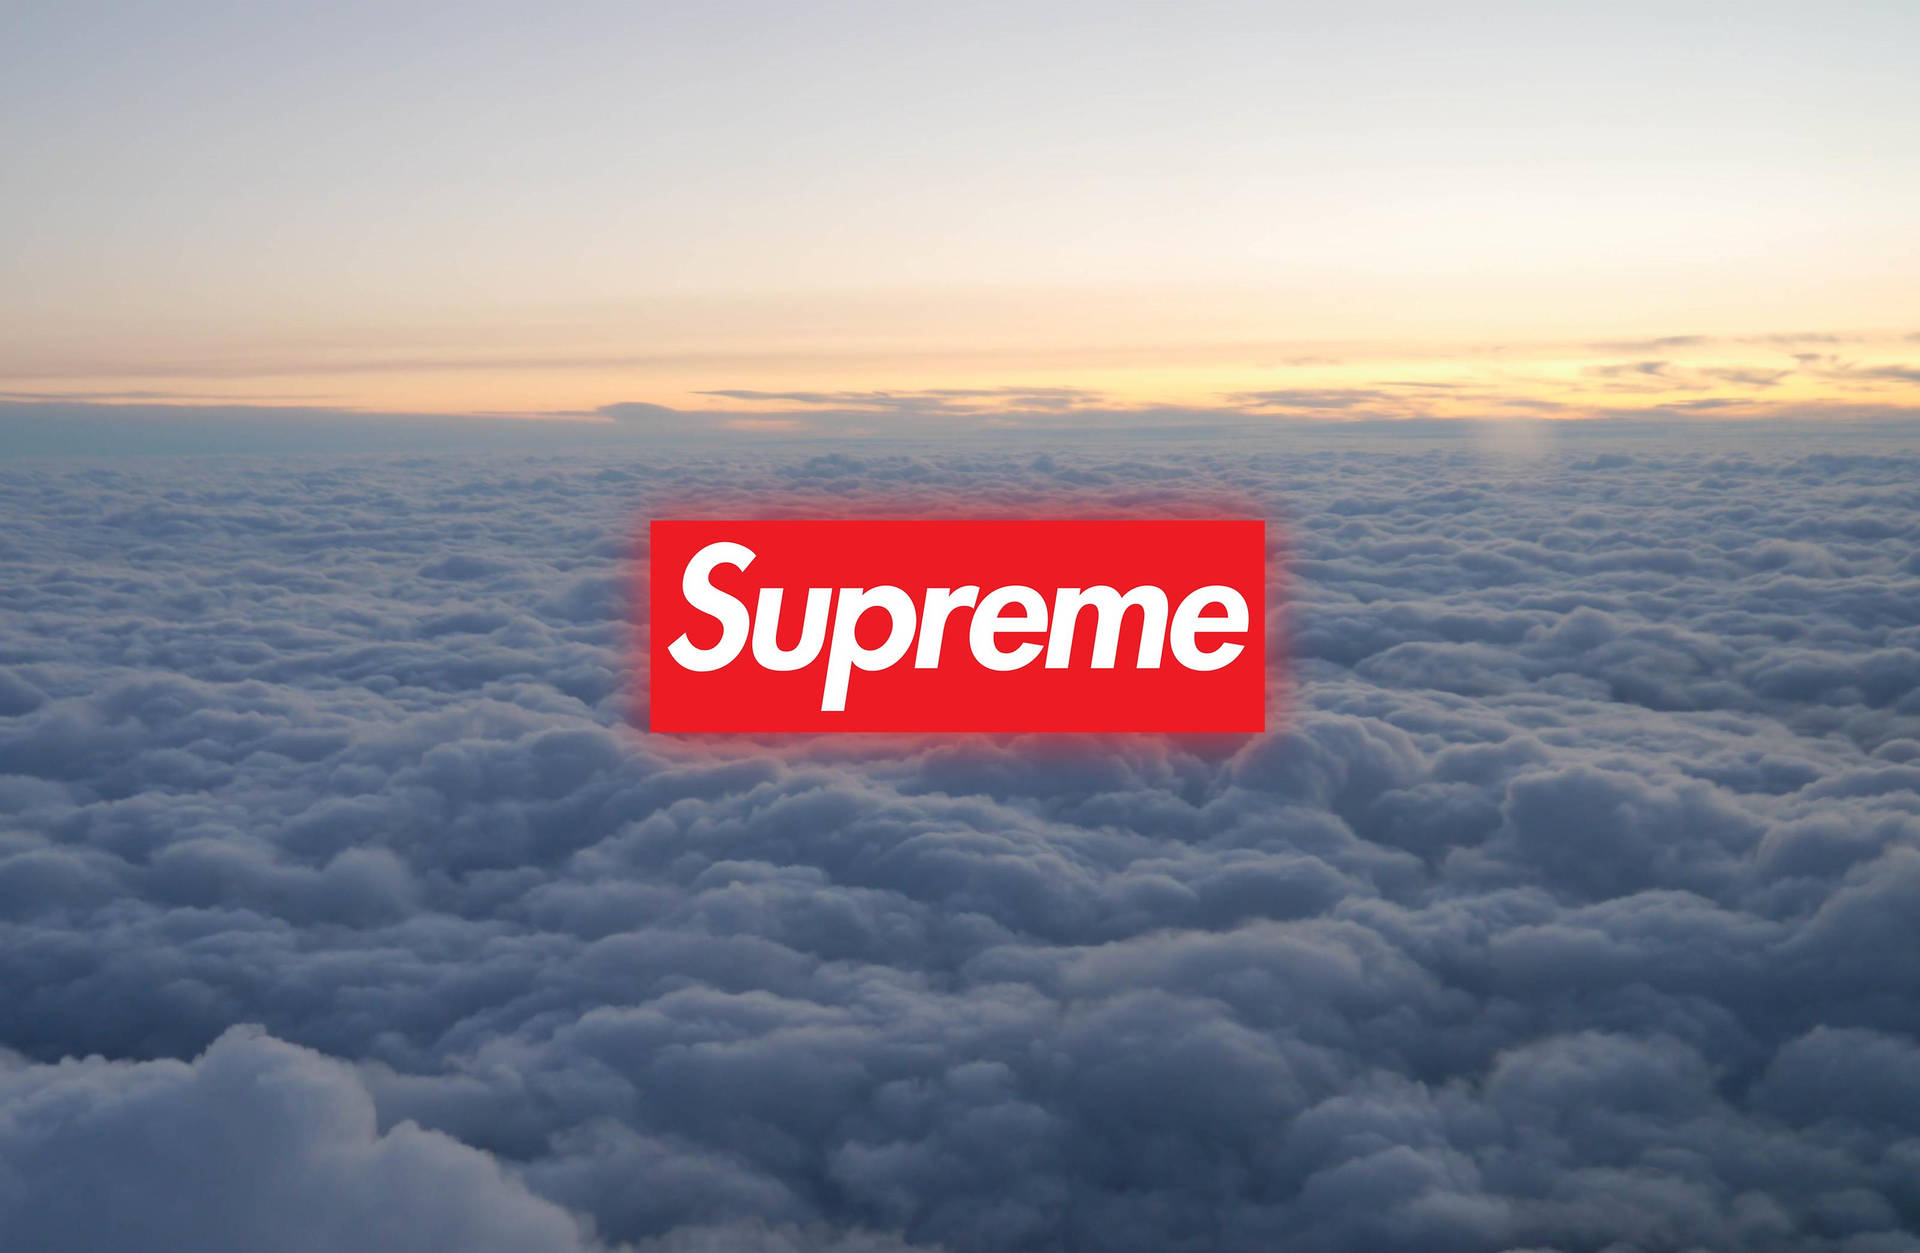 Supreme On Clouds Background